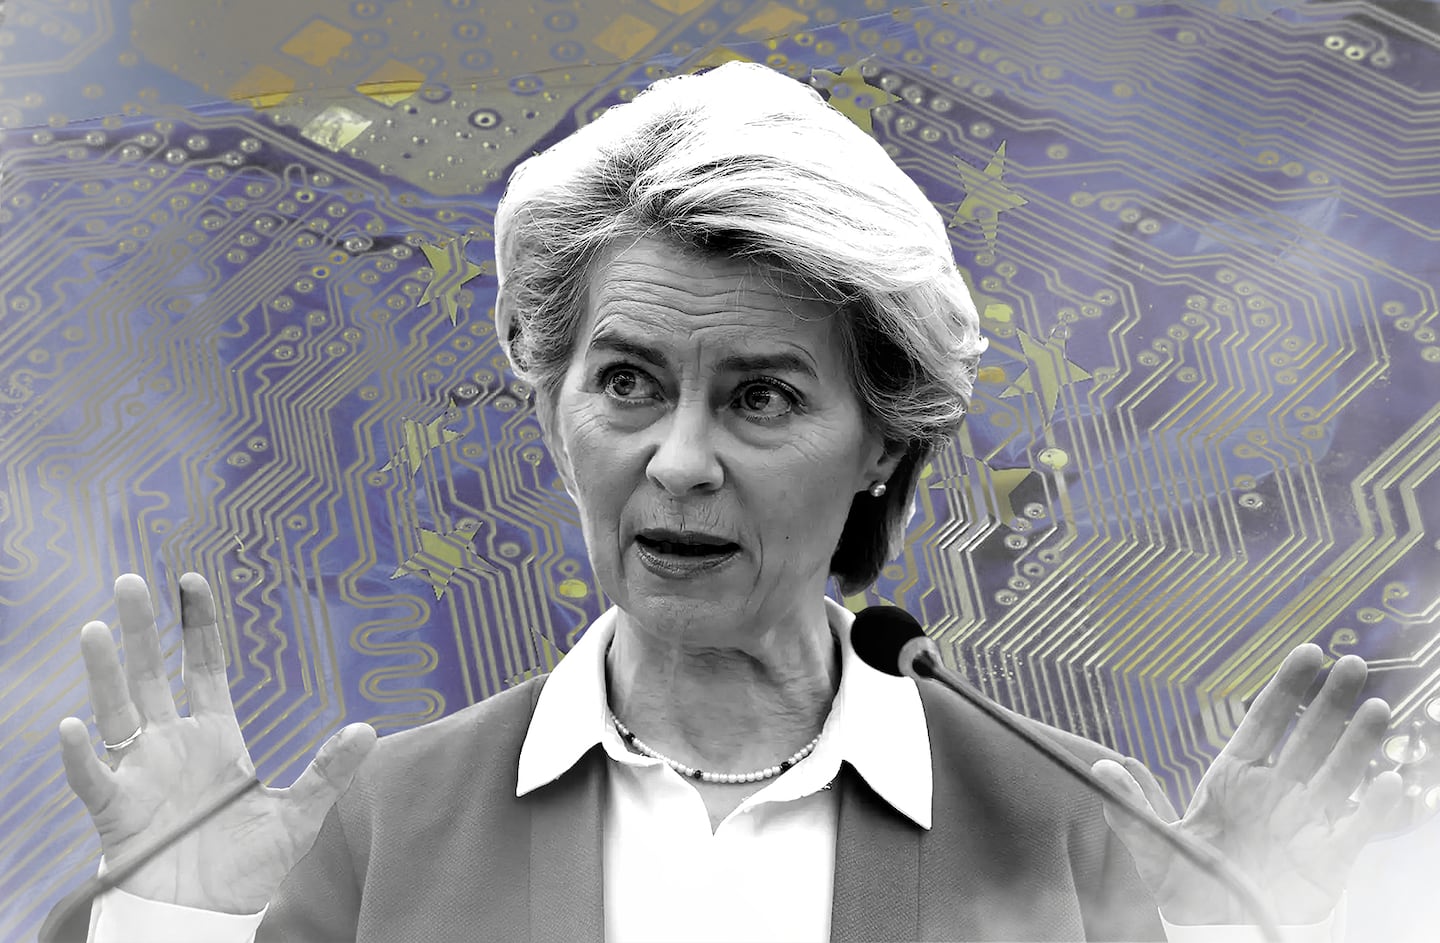 Portrait of Ursula Von der Leyen with an electronic board and the EU flag mixed in the background.